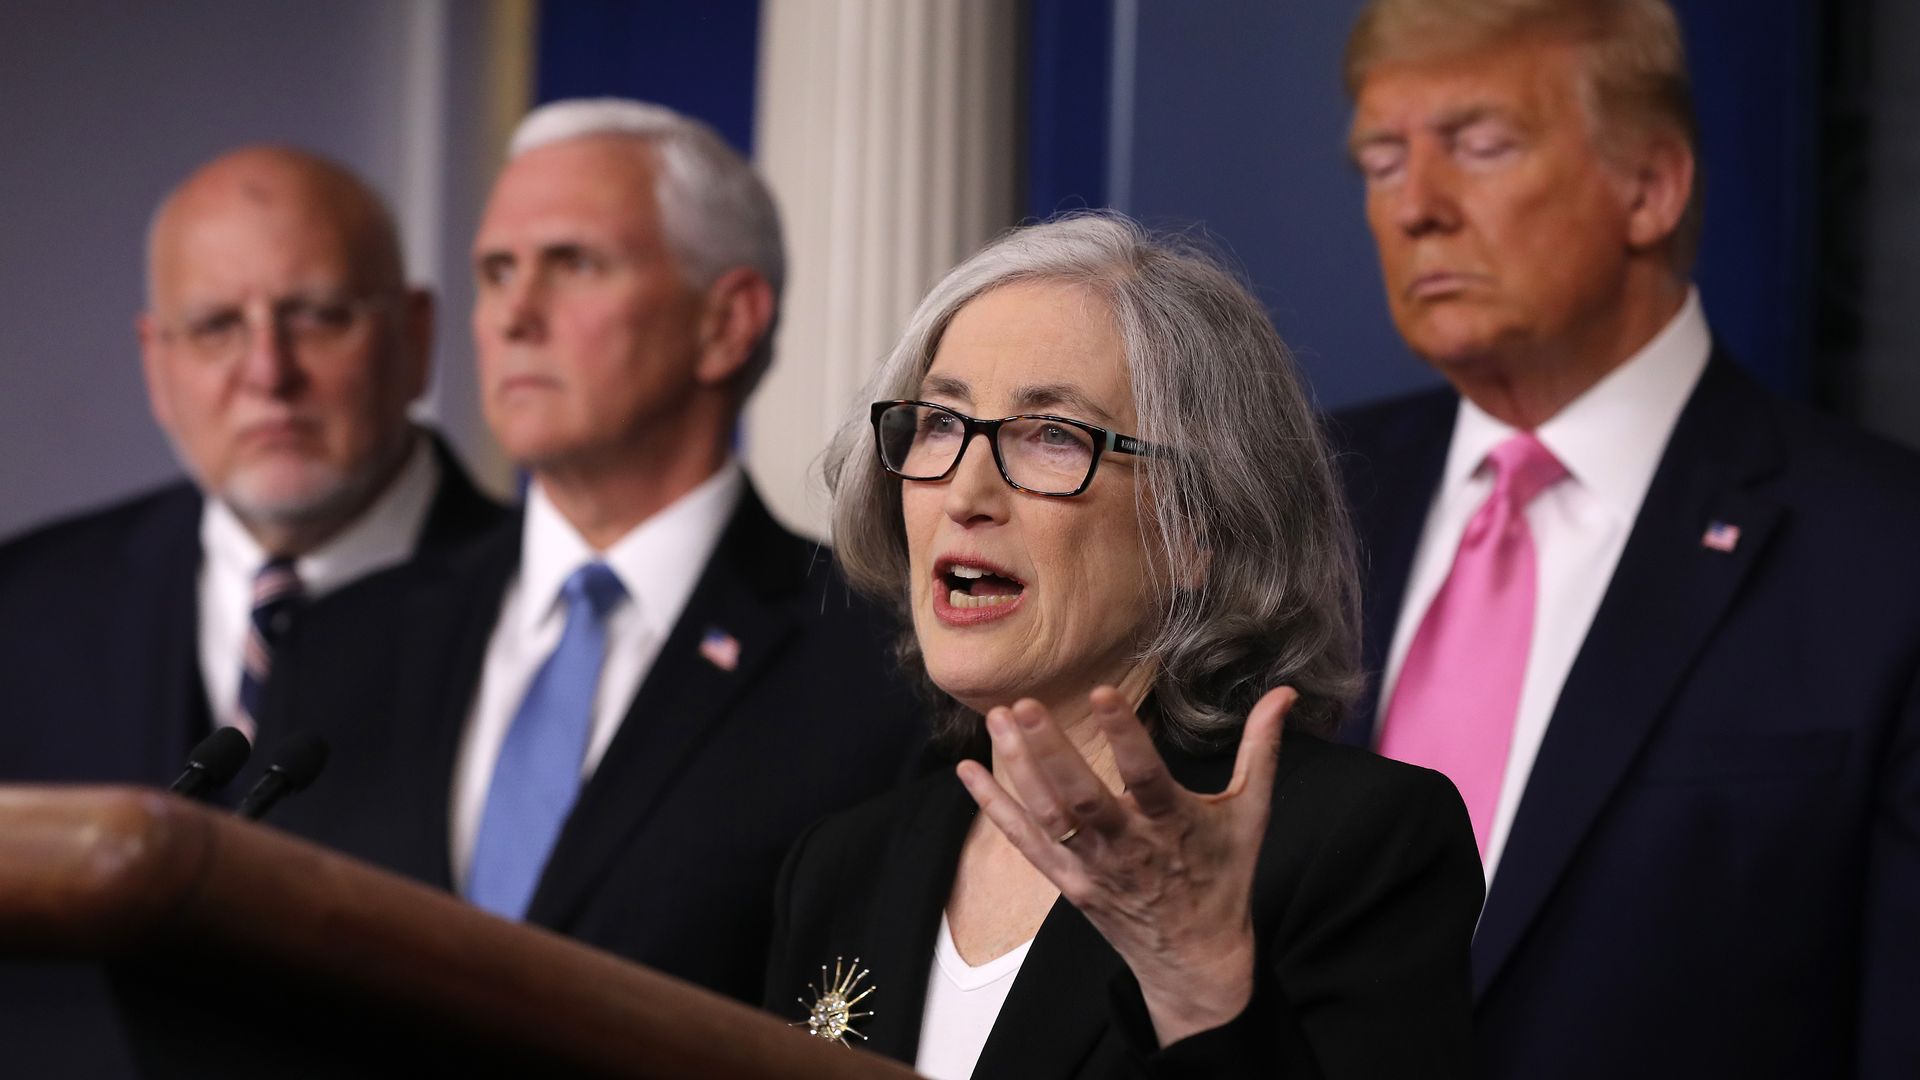  Anne Schuchat, principal deputy director for Agency for Toxic Substances and Disease Registry in the CDC speaks during a news conference as President Trump and Vice President Mike Pence look on